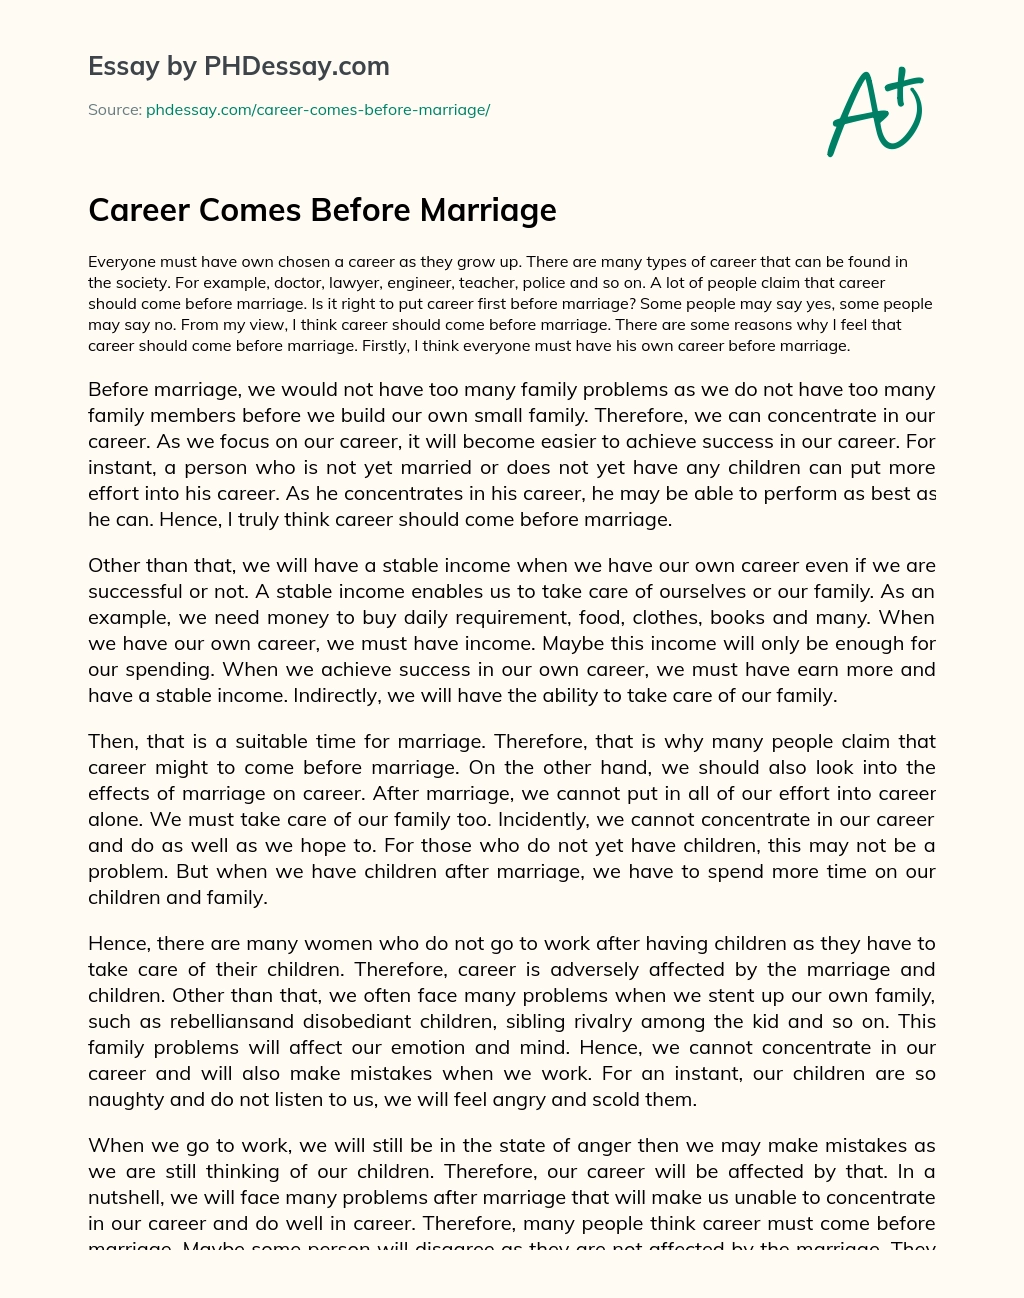 Career Comes Before Marriage essay